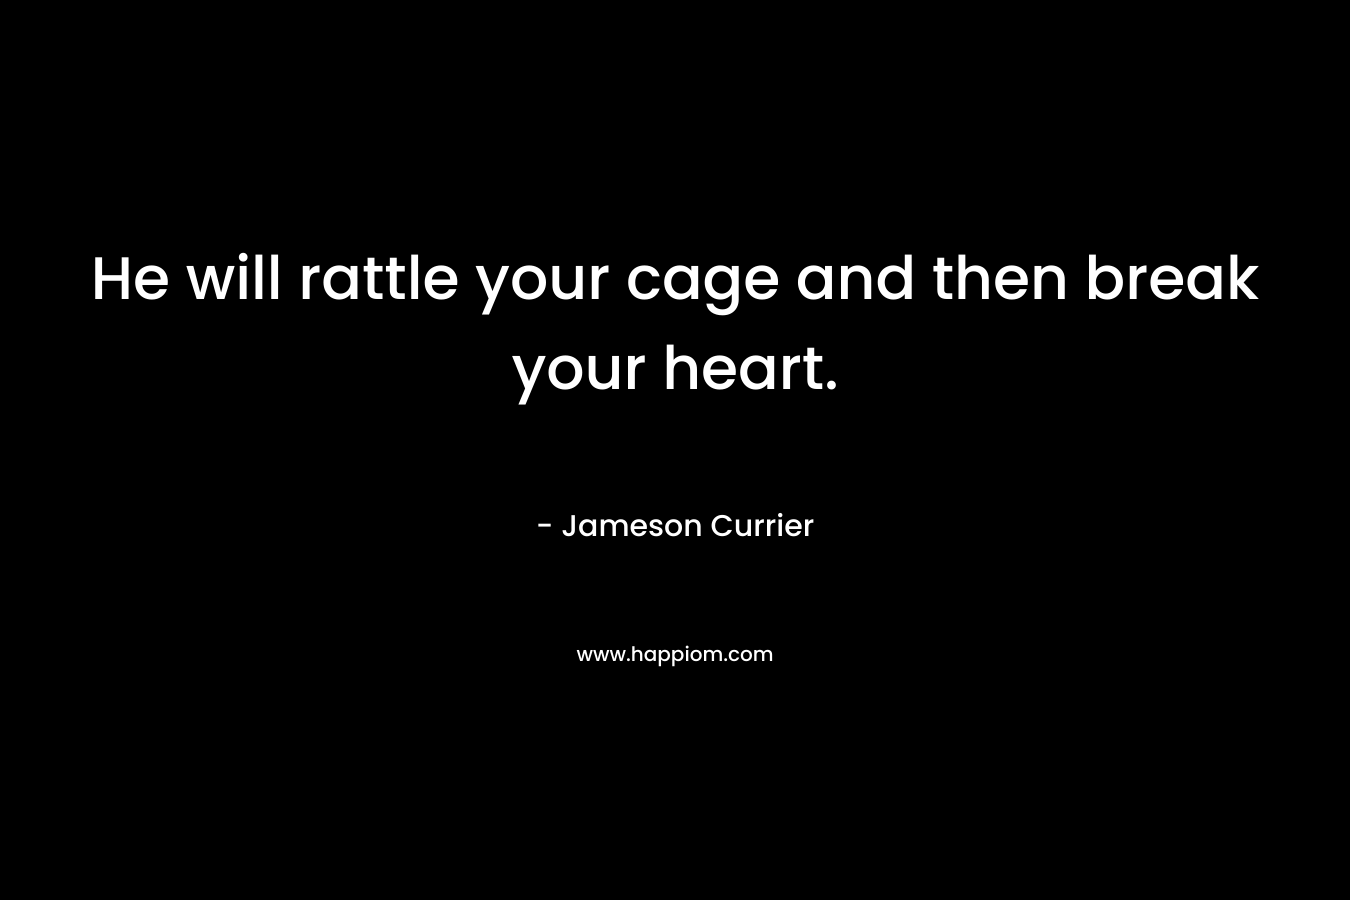 He will rattle your cage and then break your heart.